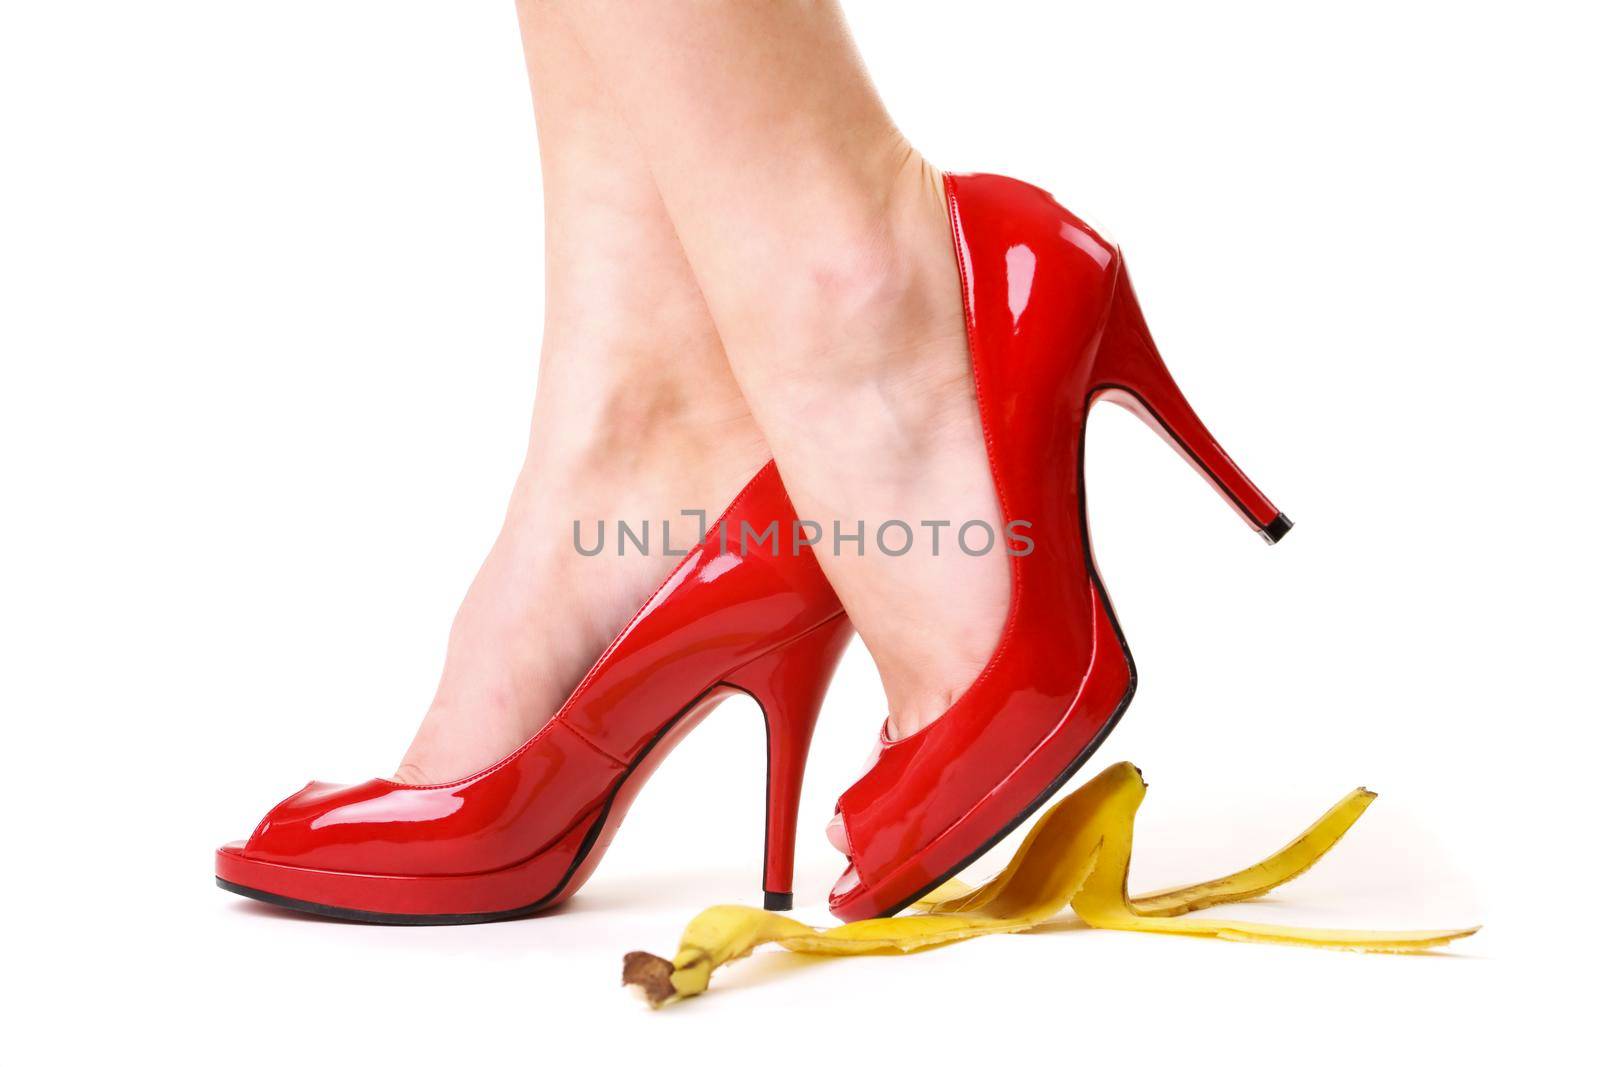 Red shoes and a banana skin